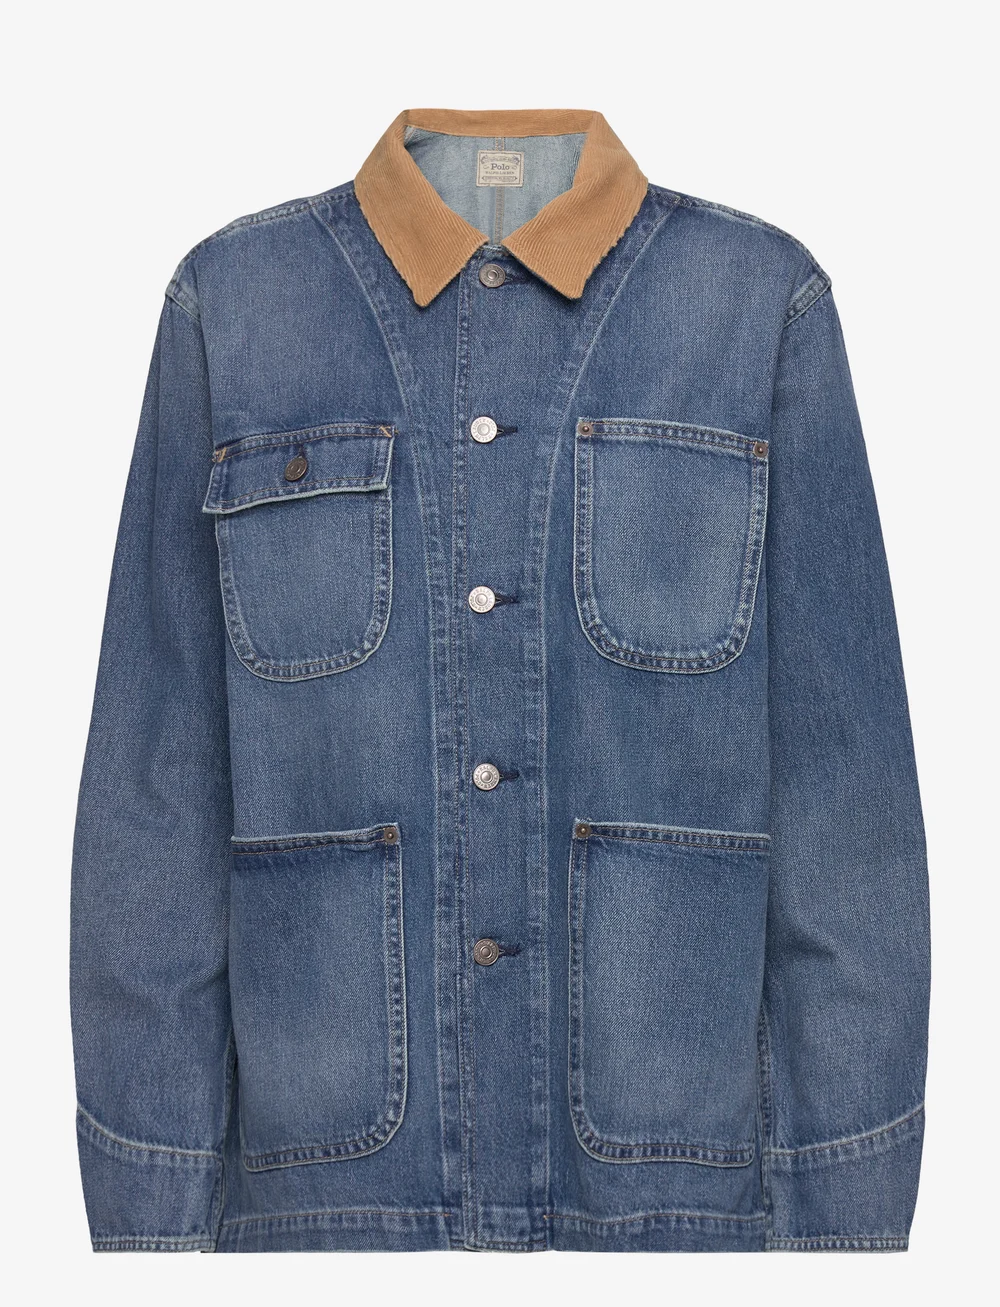 Polo Ralph Lauren Corduroy-collar Denim Chore Jacket - 179.55 €. Buy Denim  jackets from Polo Ralph Lauren online at Boozt.com. Fast delivery and easy 